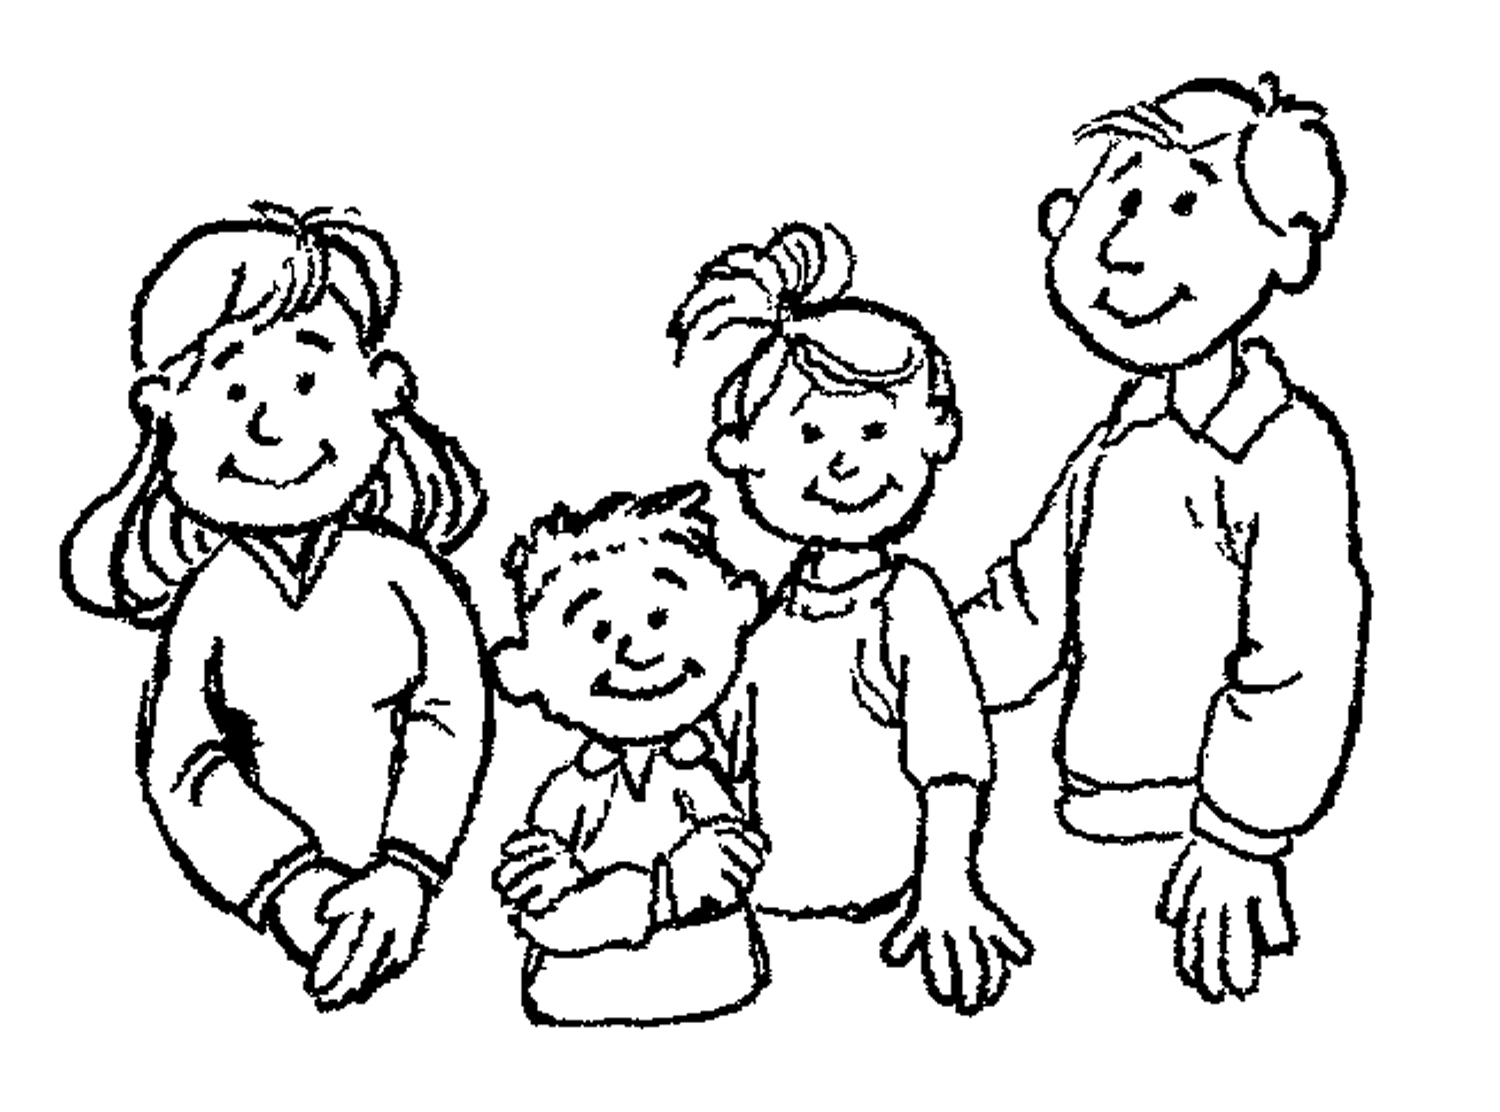 family cartoon images black and white